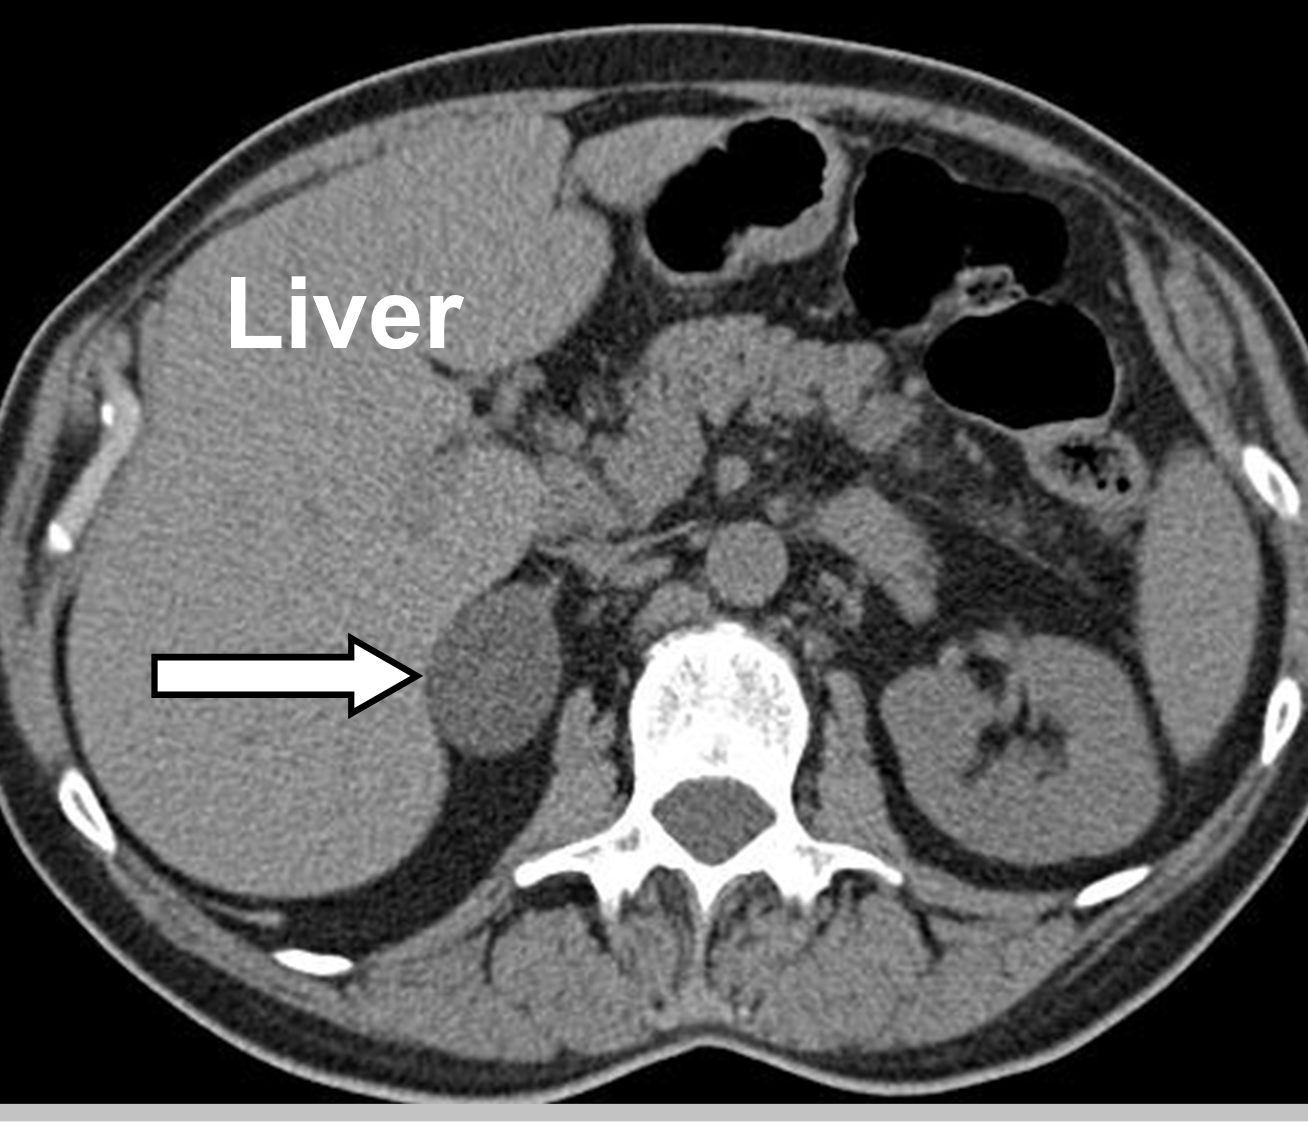 A non-contrast CT scan displaying a right adrenal incidentaloma. All incidentally identified adrenal tumors need to be worked up to ensure they do not overproduce hormones or are cancerous.